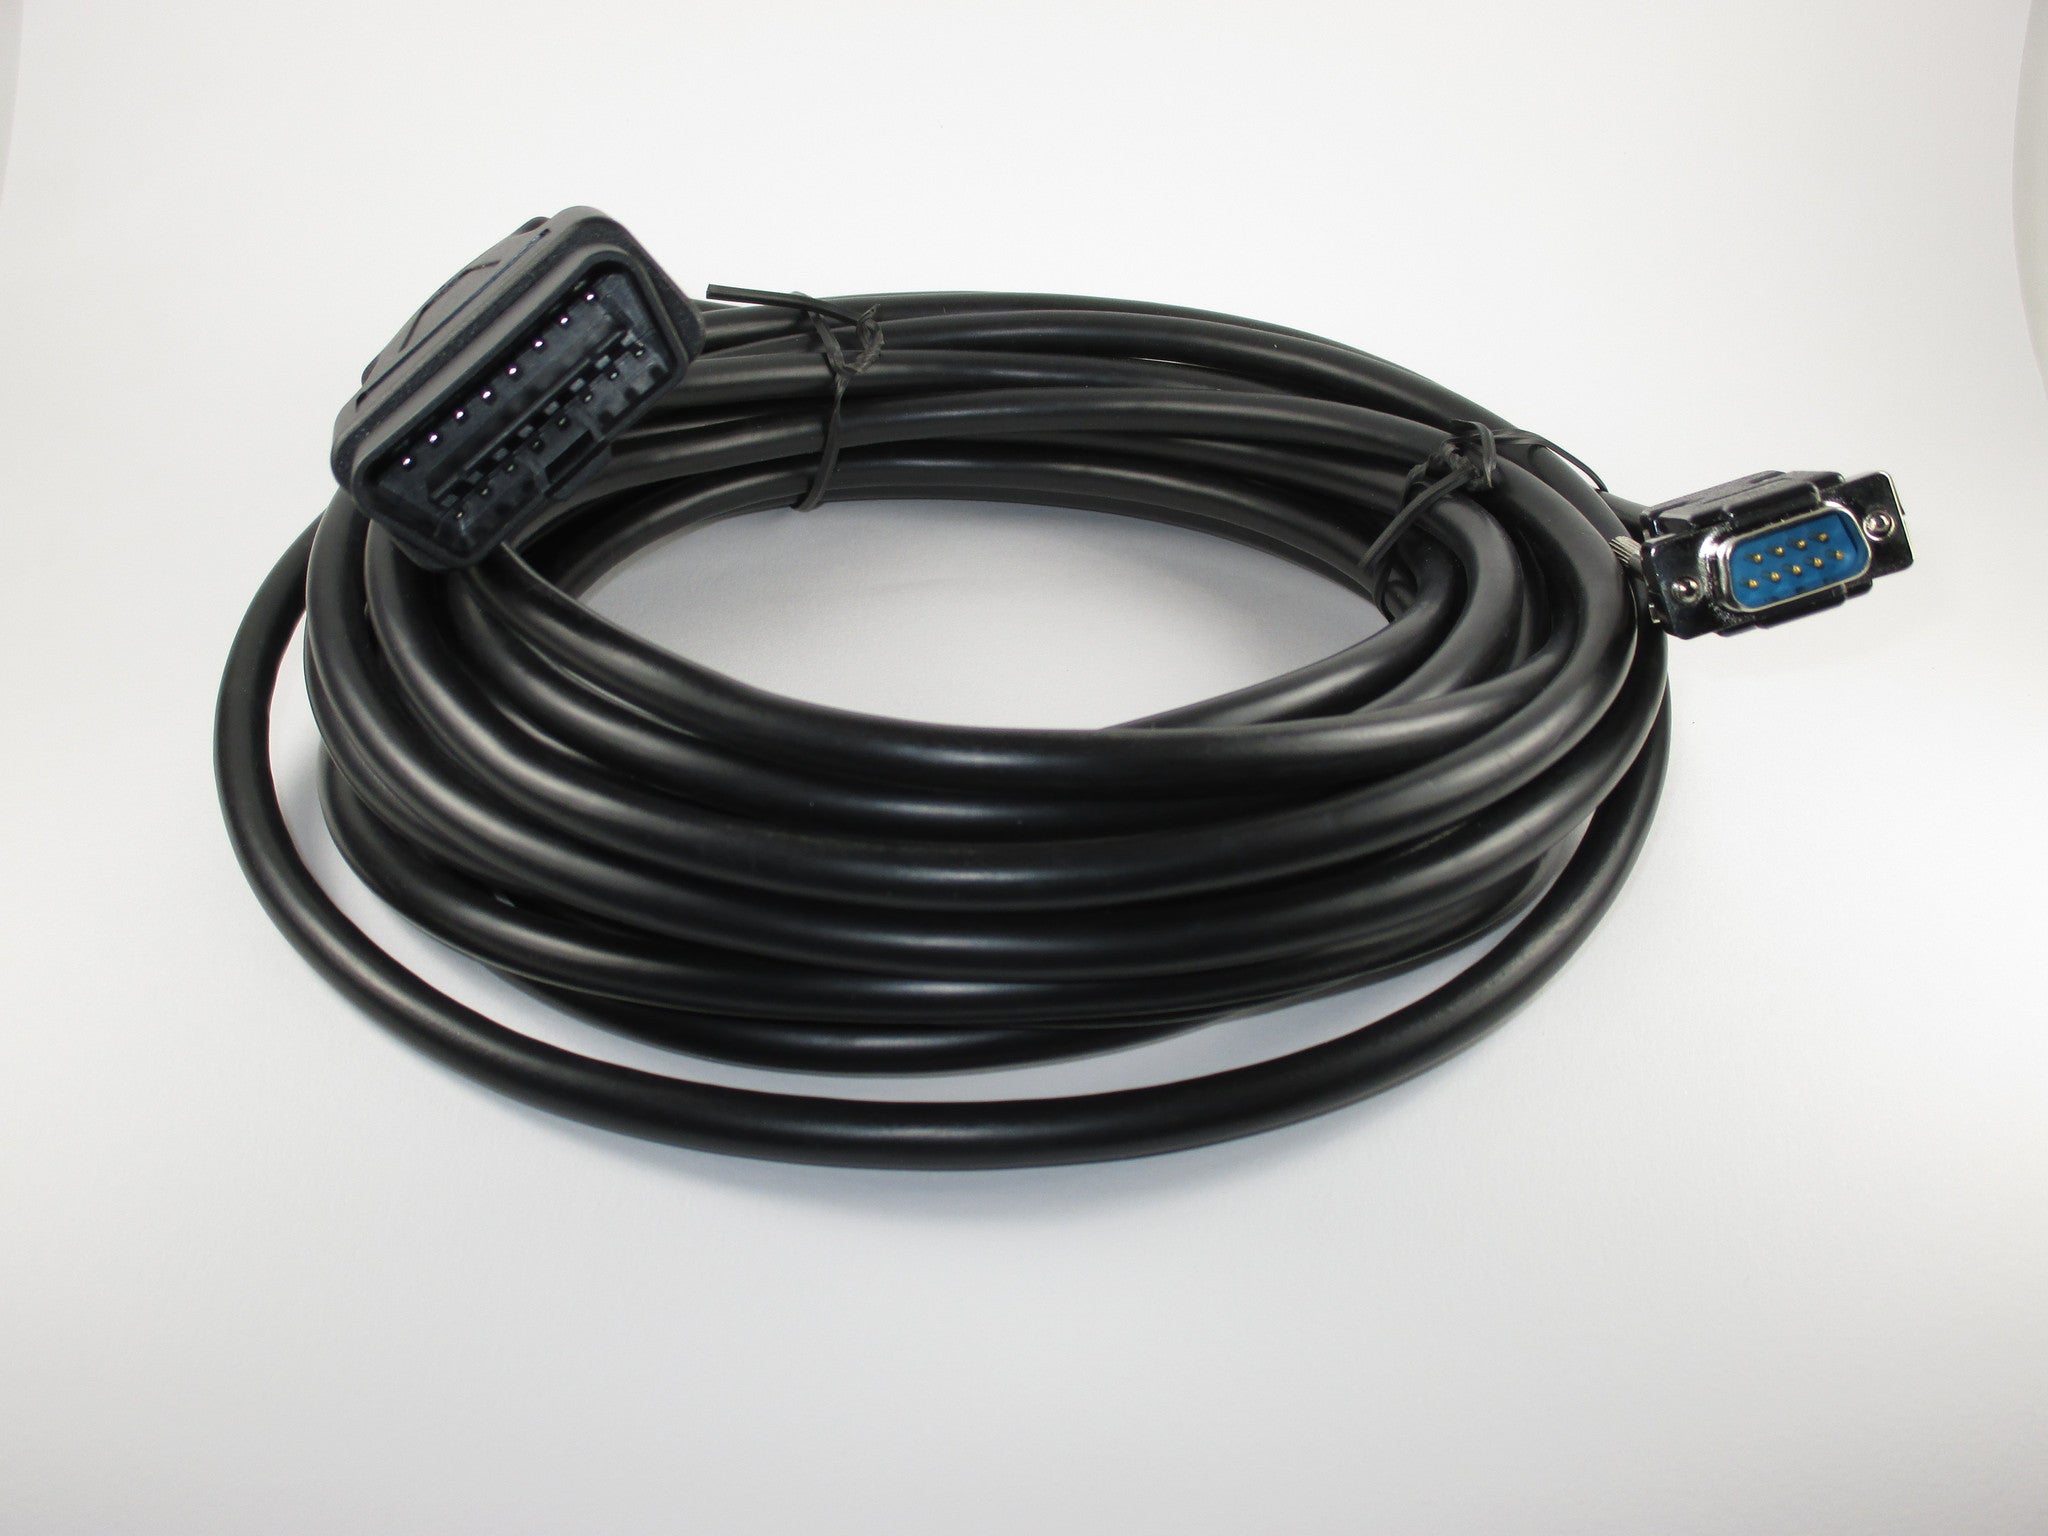 SUN B.A.R. 97 HEAVY DUTY OBDII CAN CABLE 6 04222A